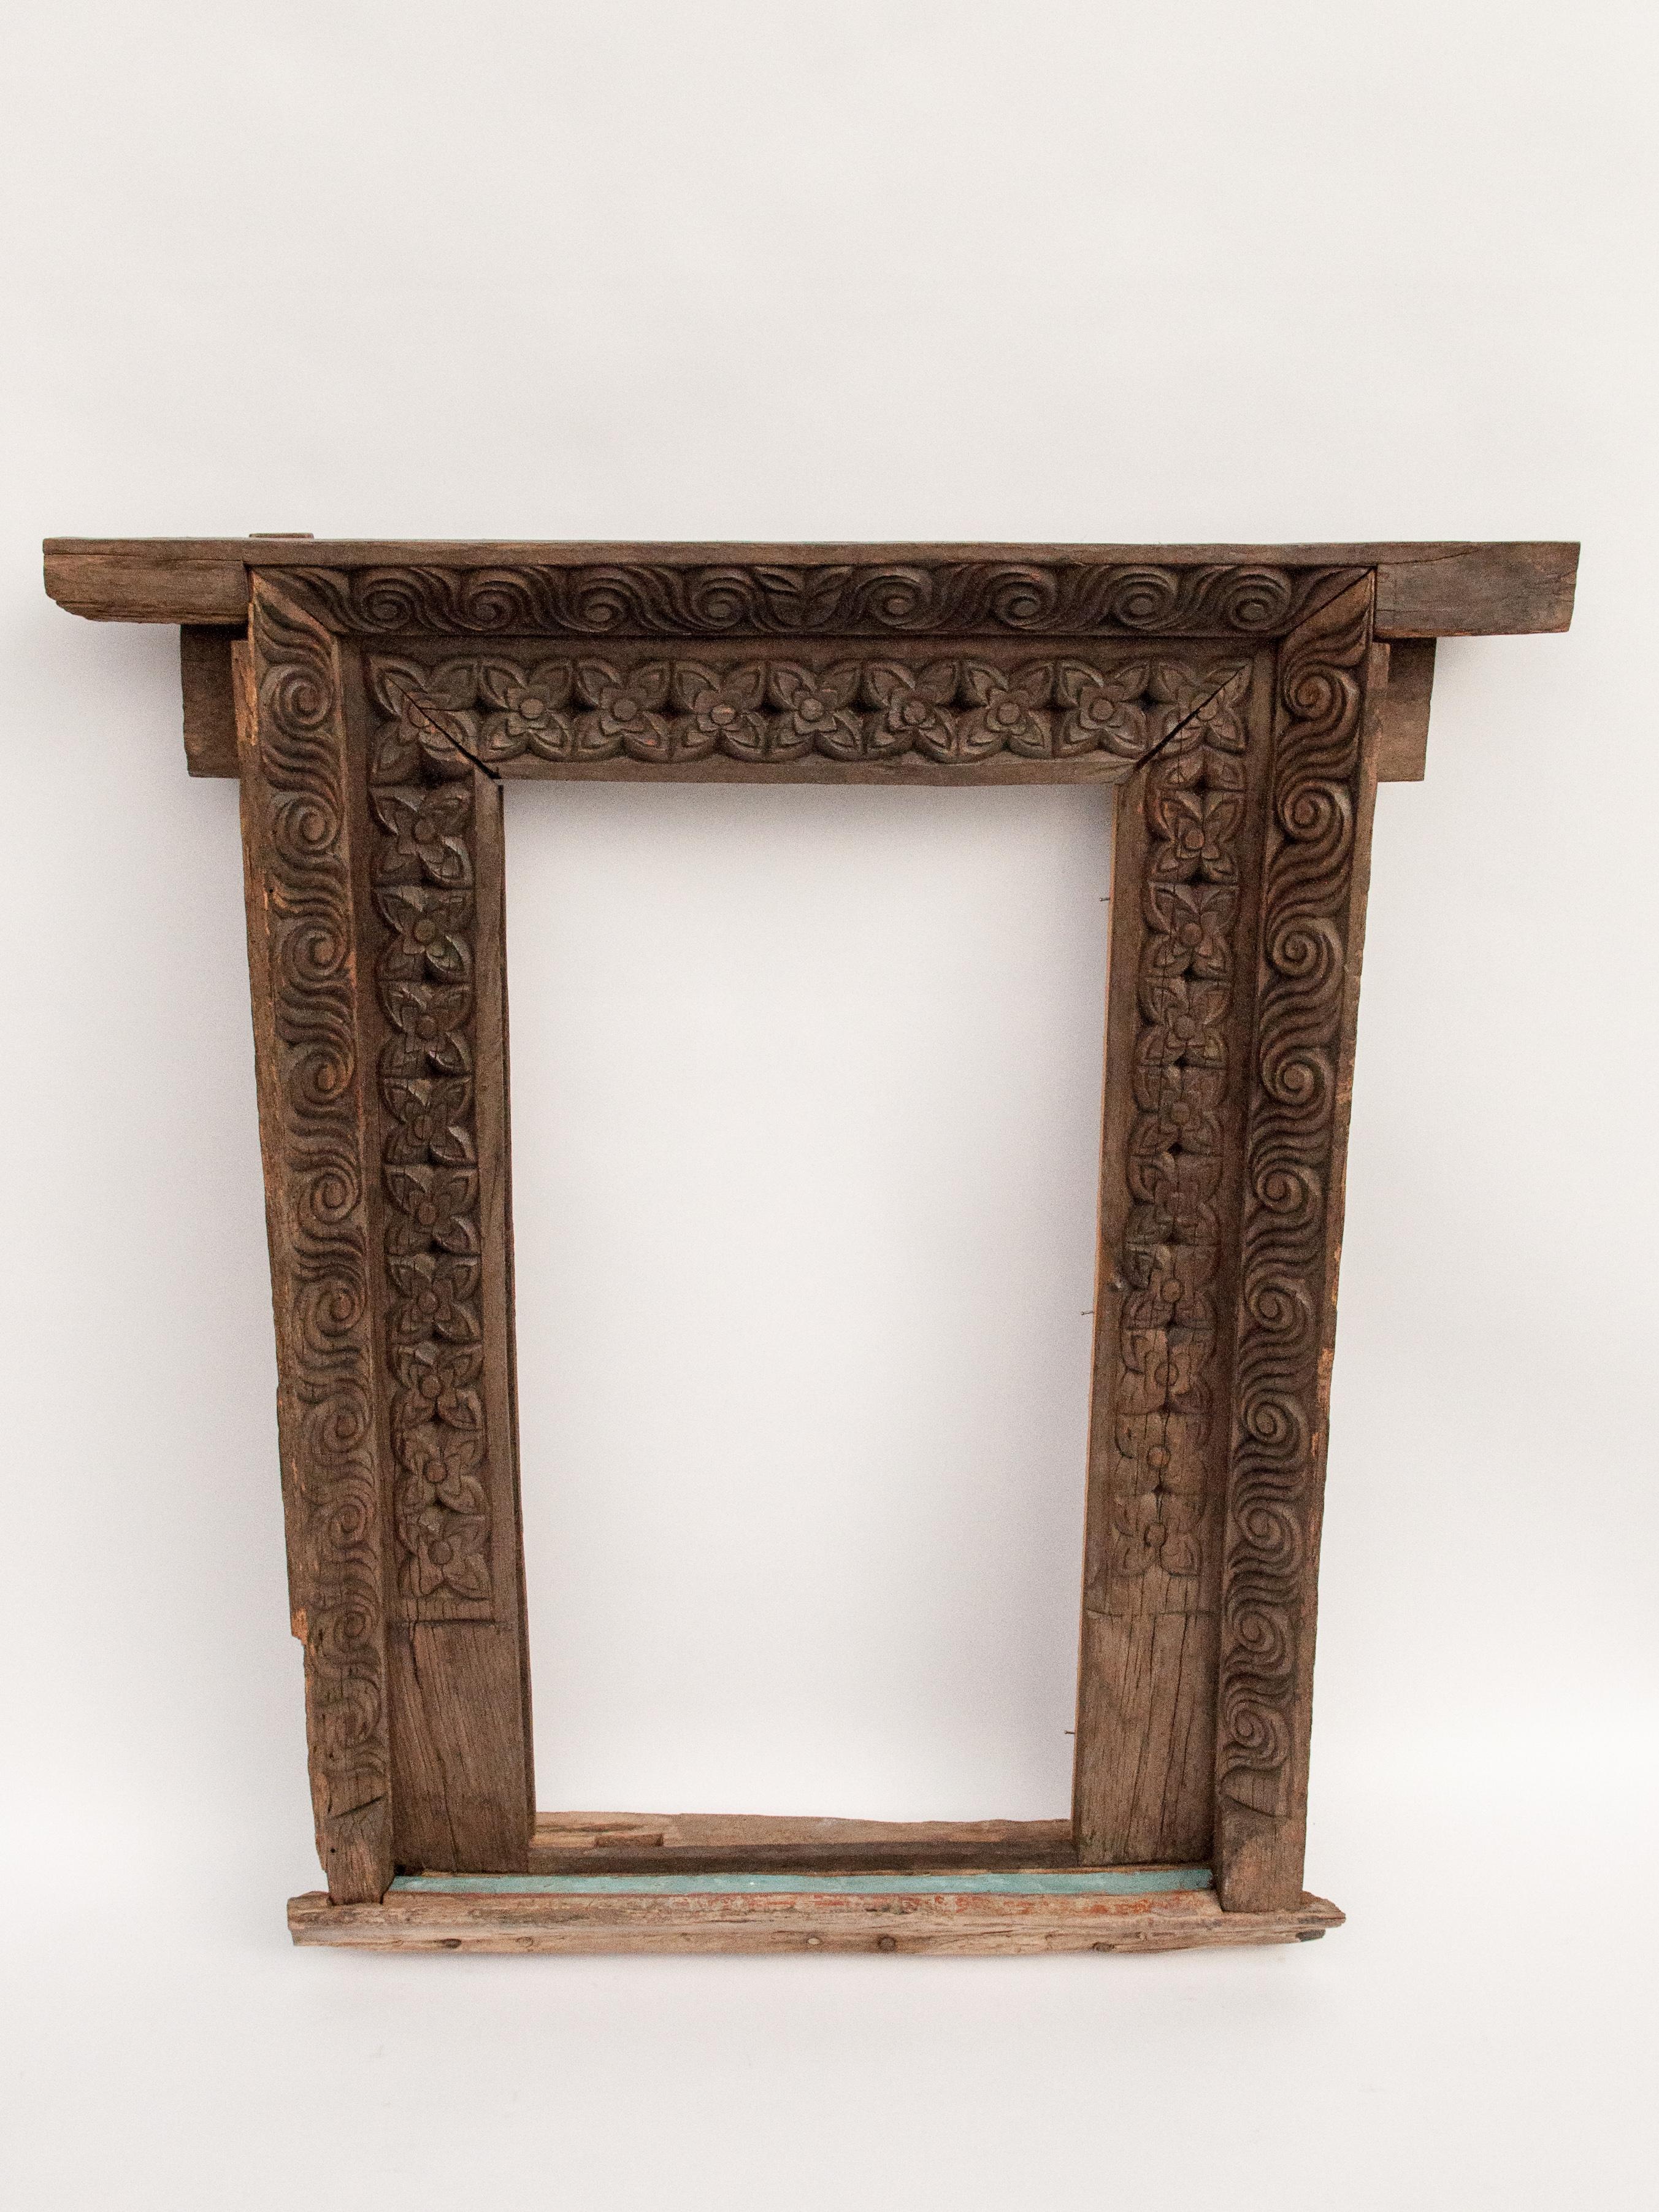 Hand carved wooden window or mirror frame, late 19th century, Nepal. Measure: 32.5